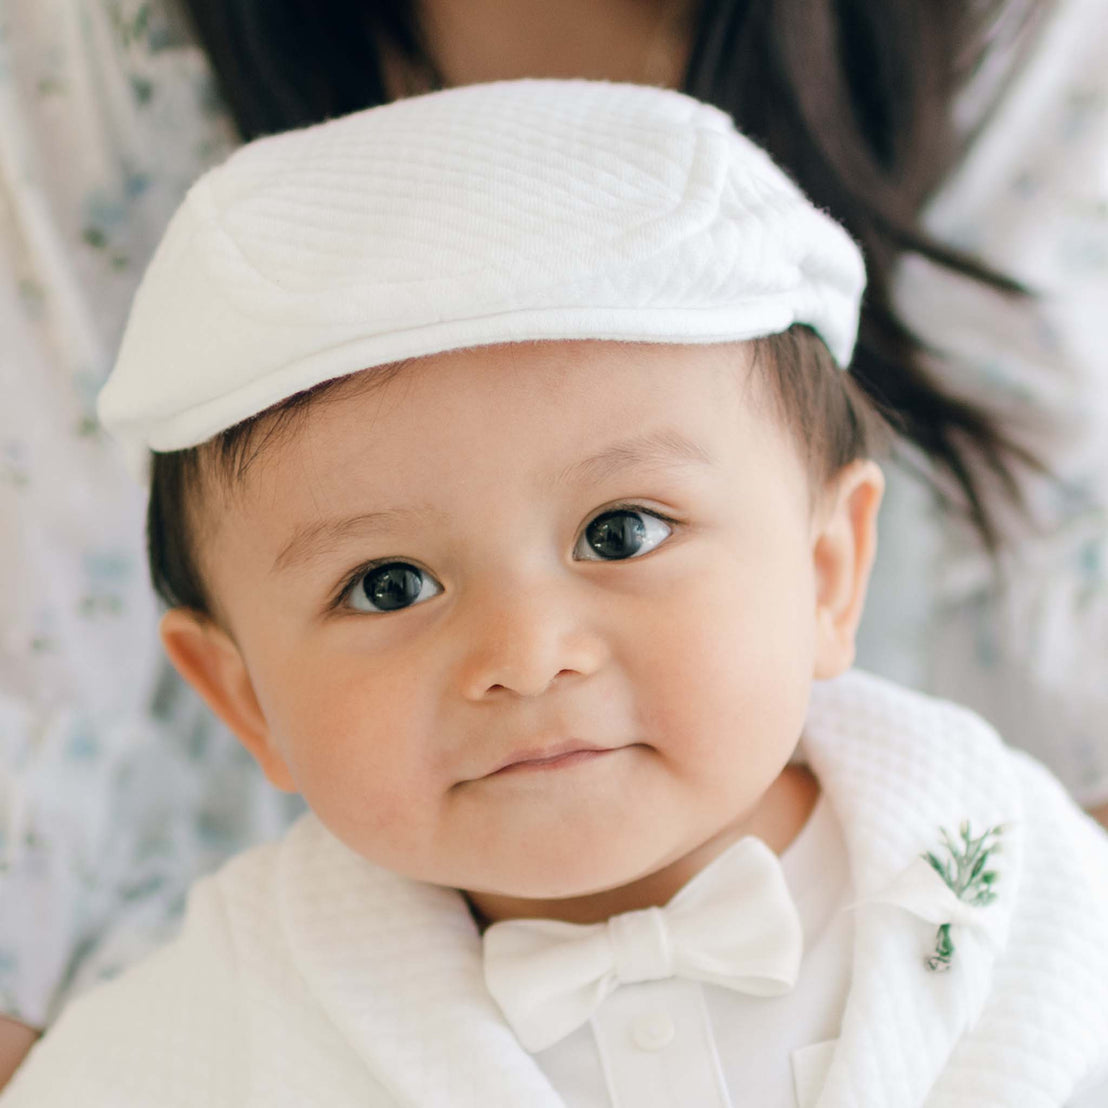 A baby dressed in white textured cotton, wearing the Elijah Newsboy Cap along with a matching bow tie, looks towards the camera. The baby has dark eyes and a small smile. Partial view of an adult in the background.